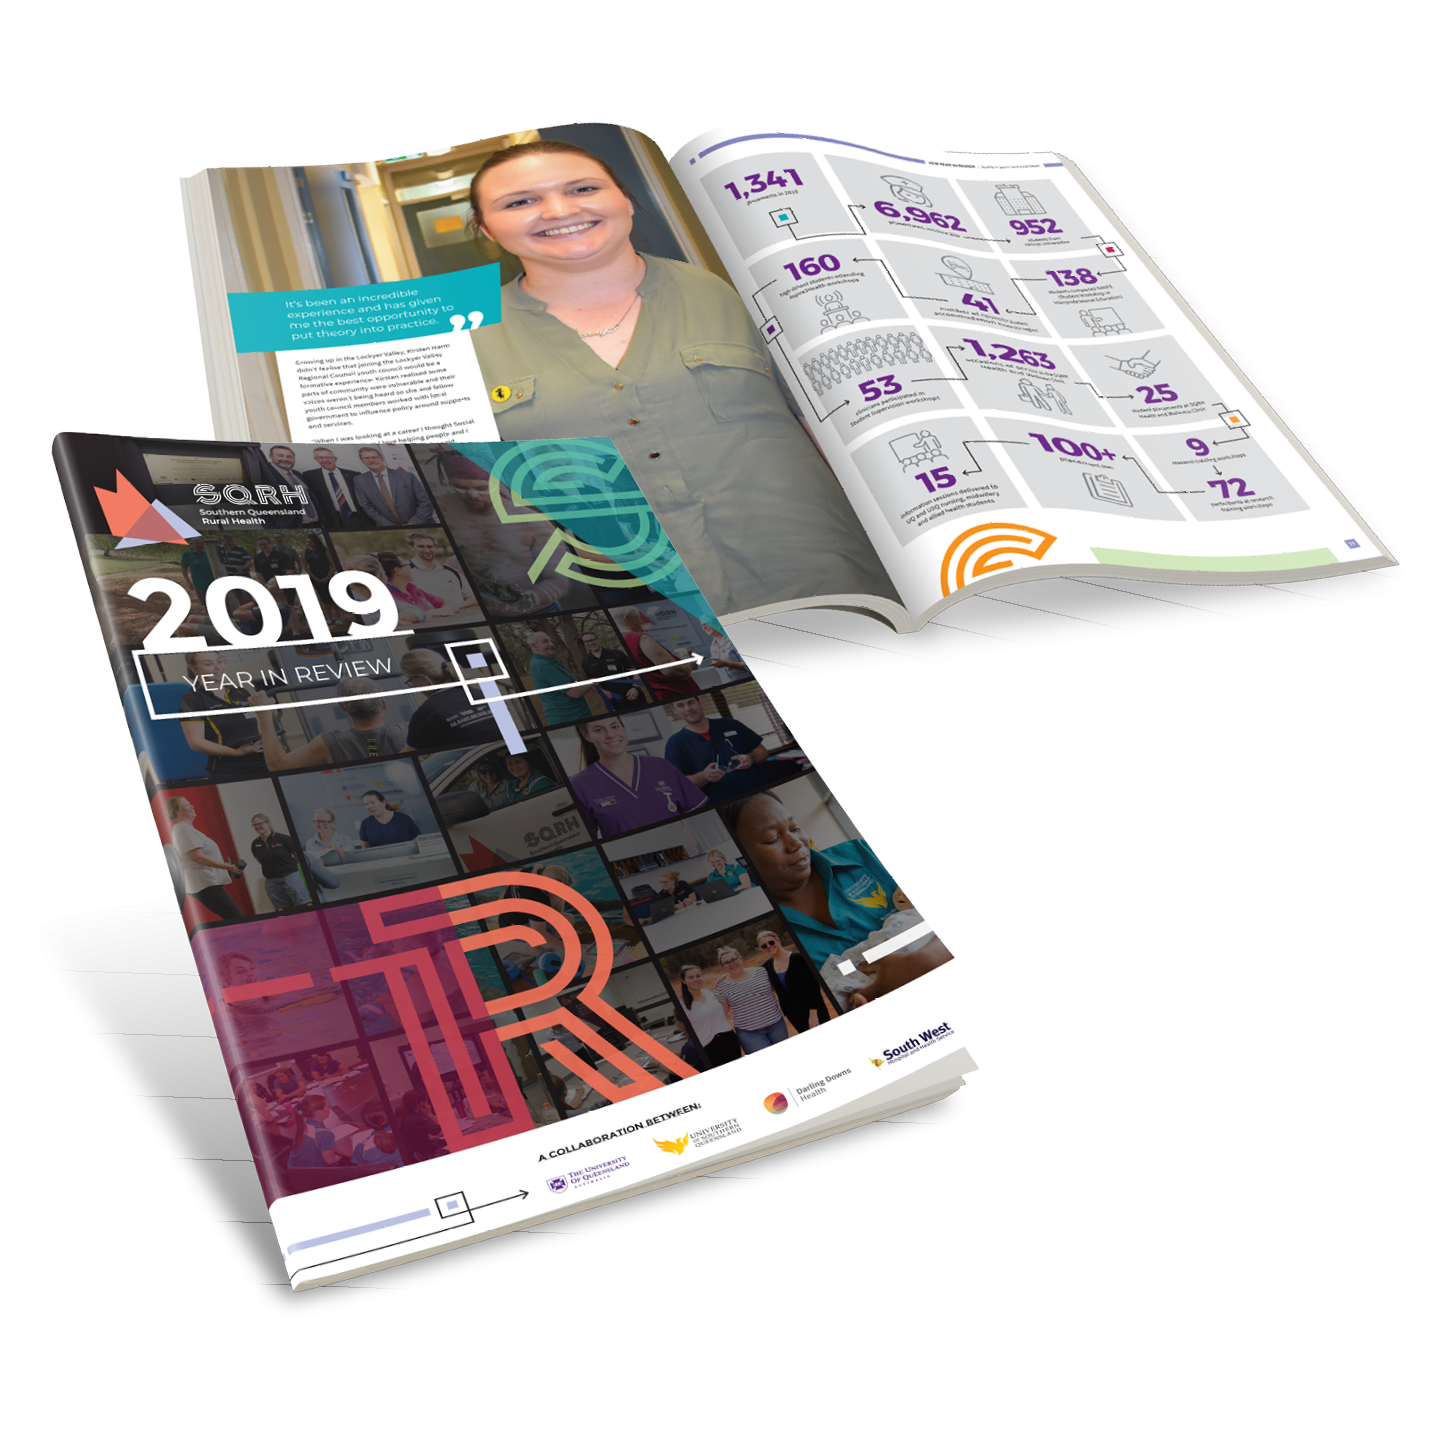 2019 SQRH Year in Review mockup